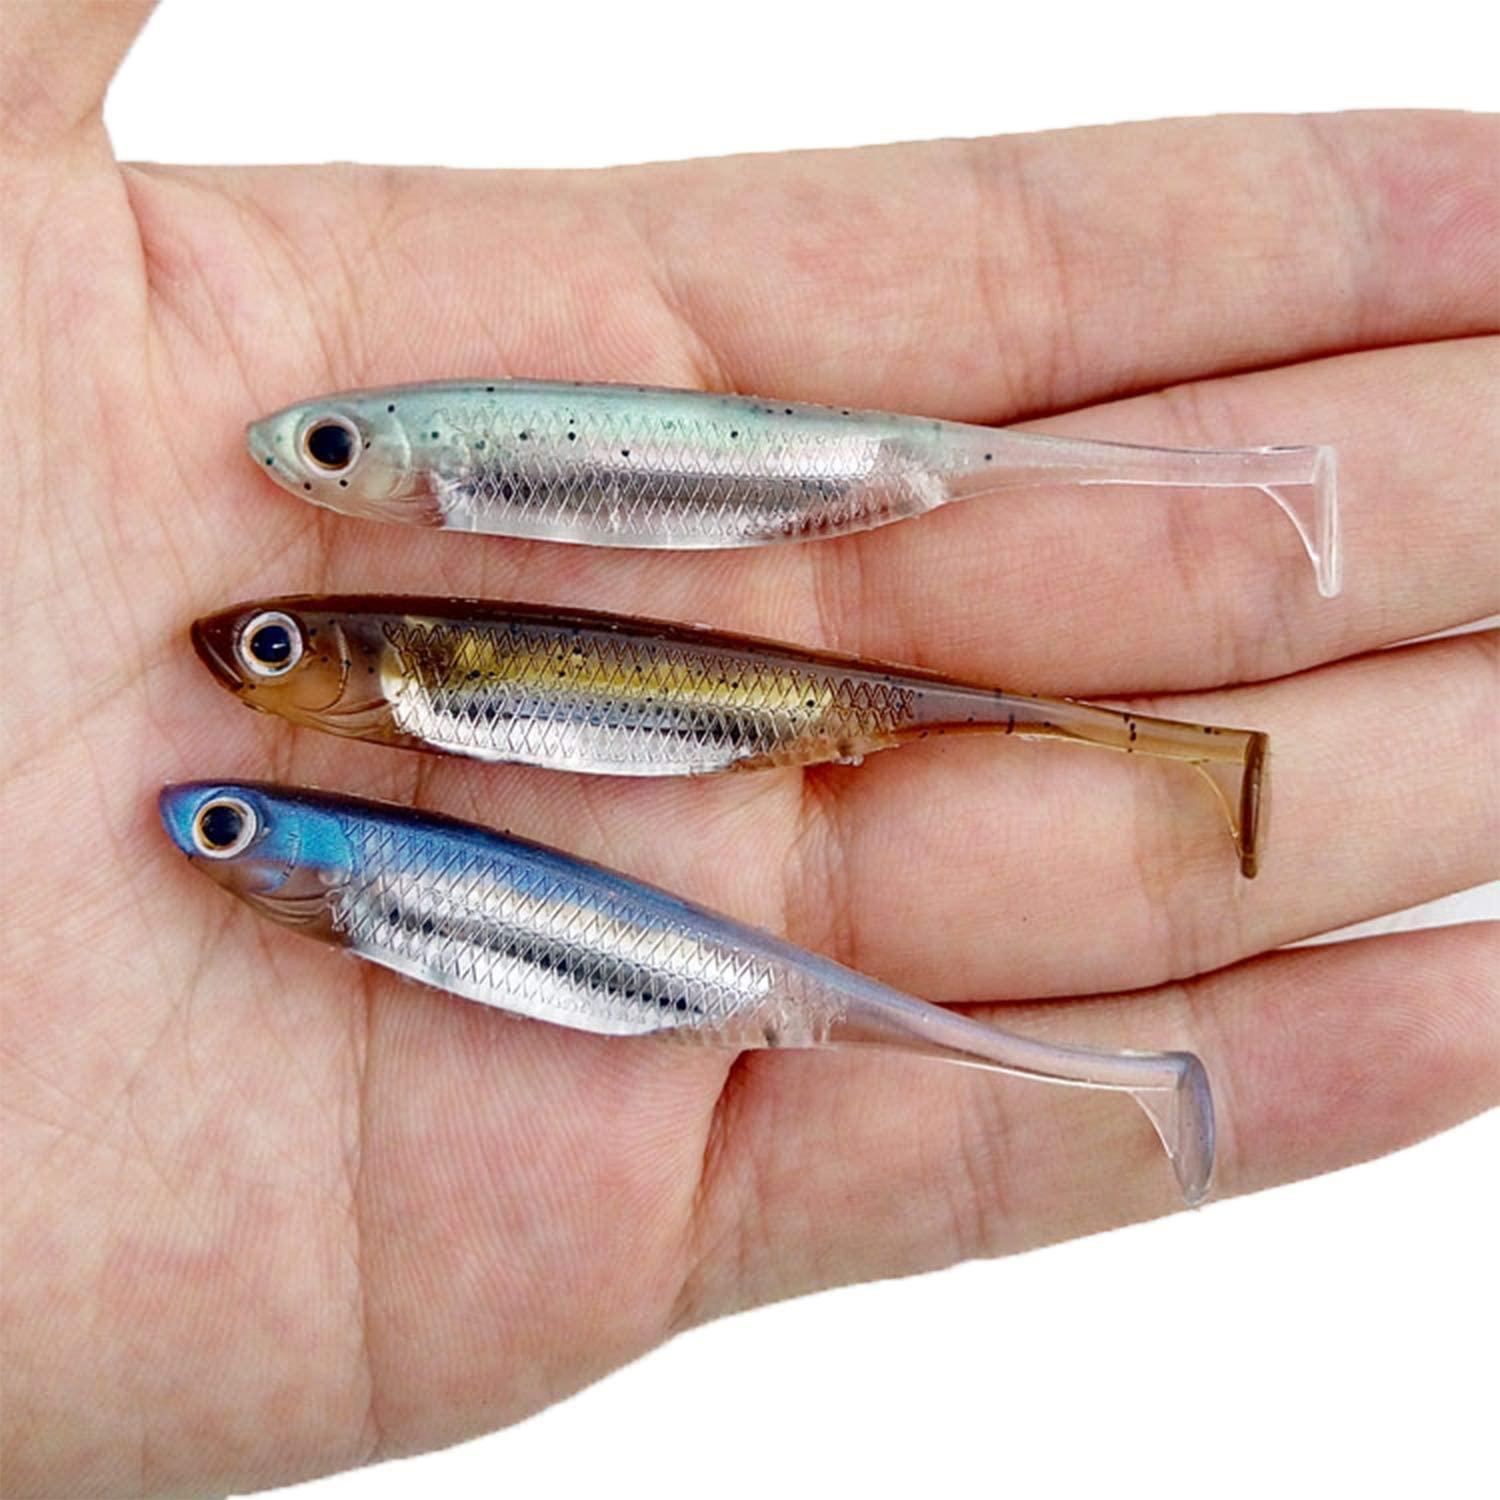 Soft Fishing Lures Paddle Tail Swimbaits Shad Bait Minnow Bait Shad Lure  Soft Plastic Fishing Lures for Pike Perch Bass Trout Crappie Walleye